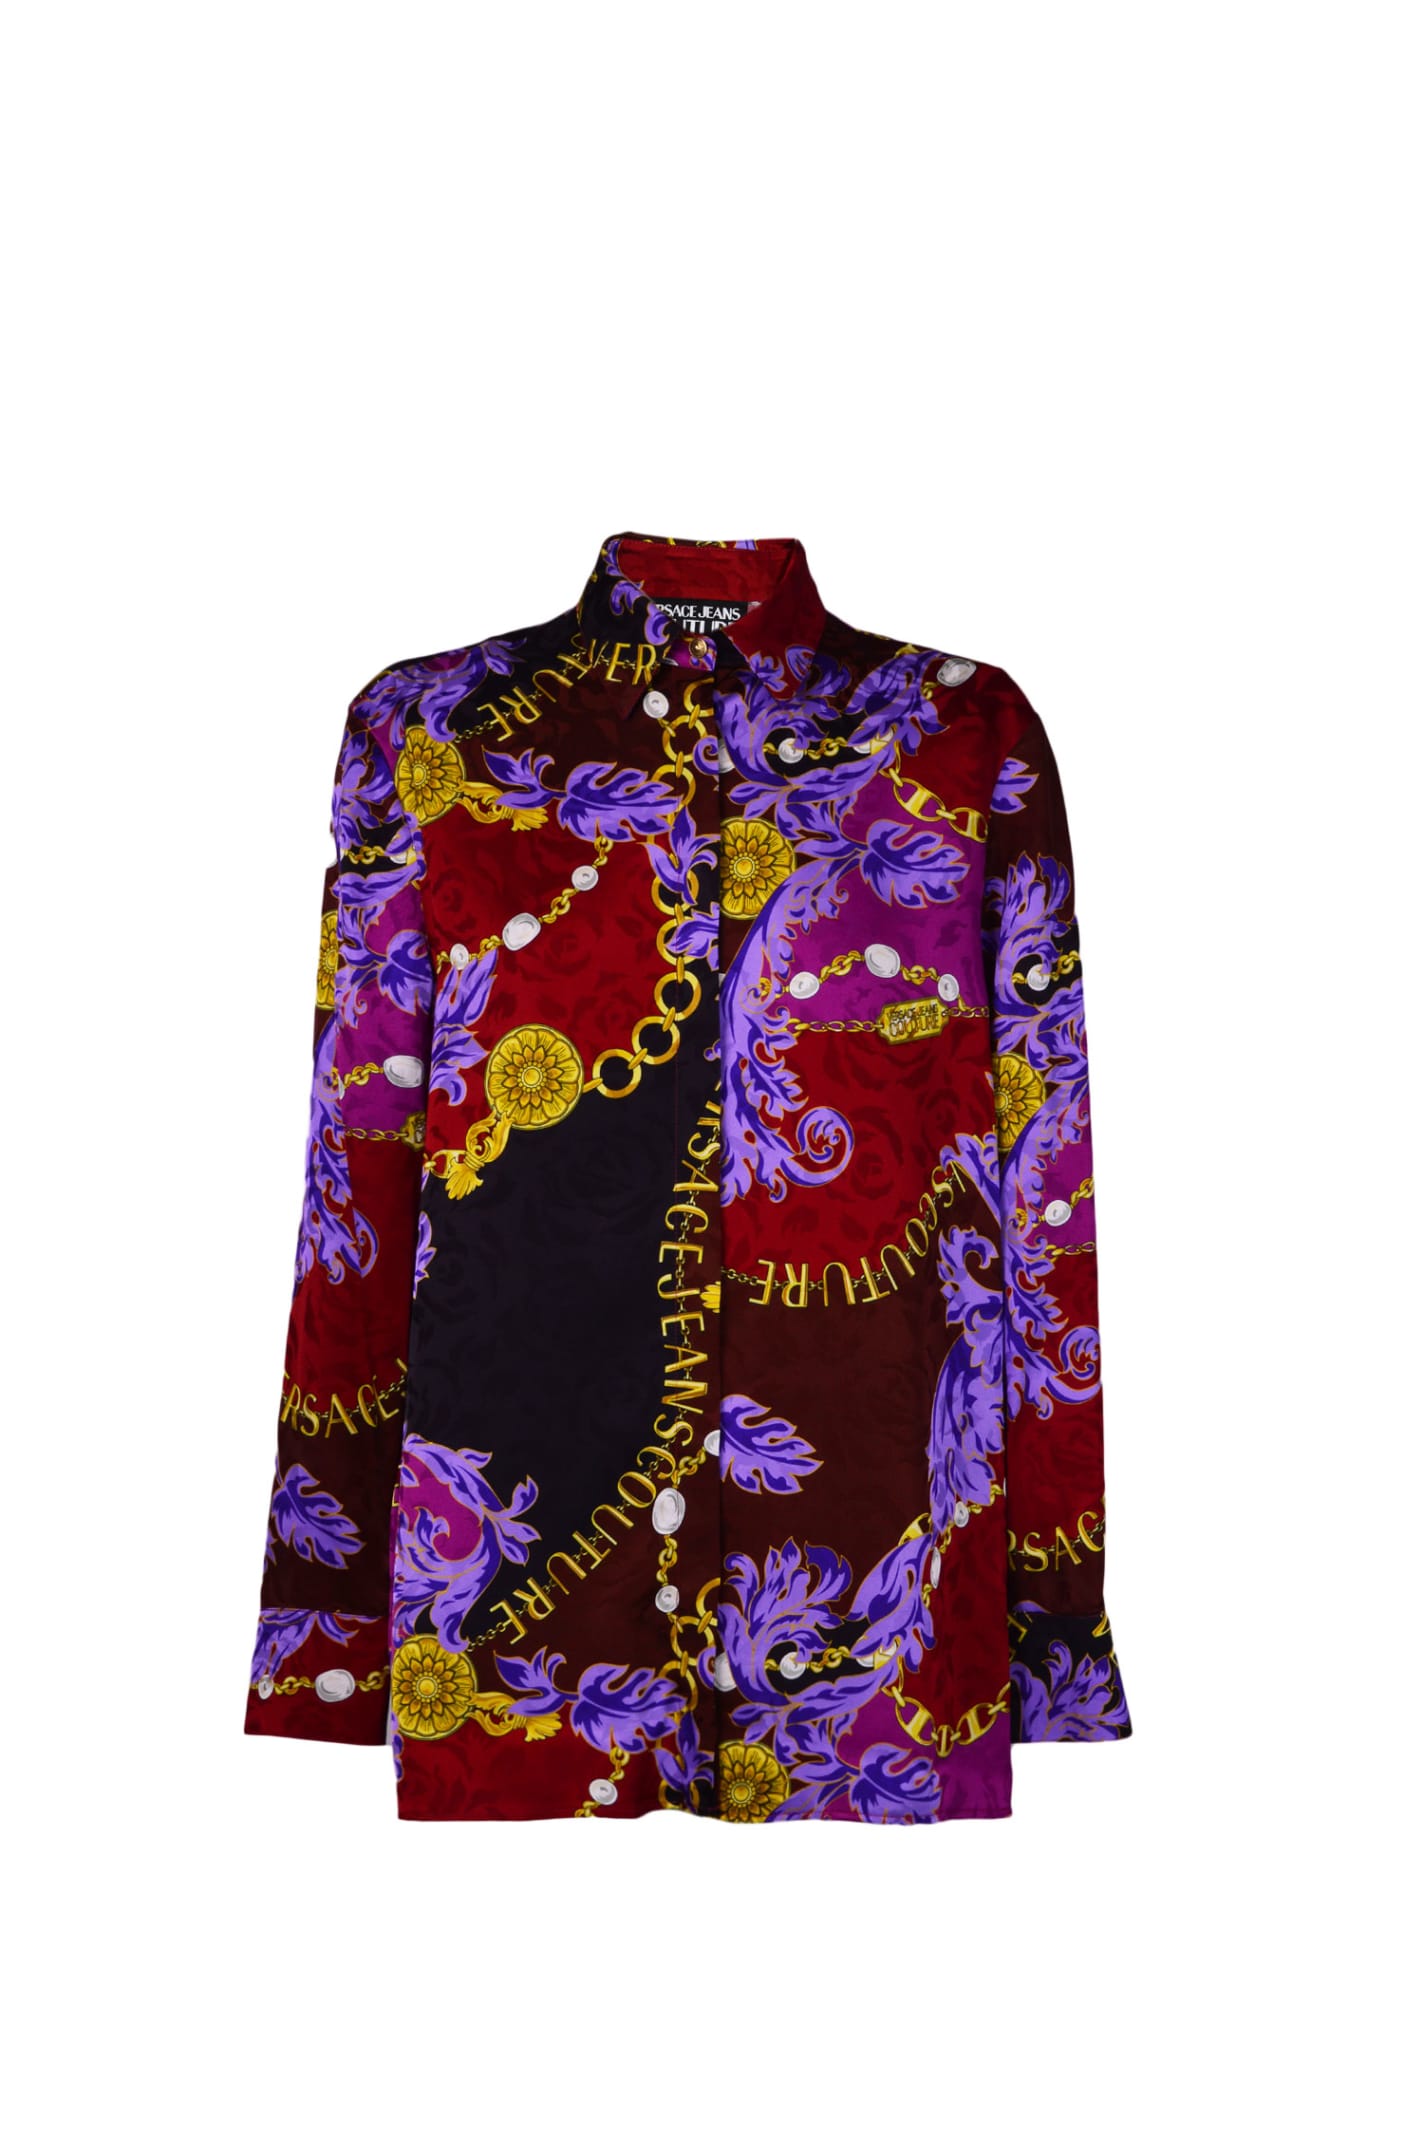 Versace Jeans Couture Shirt In Purple/red